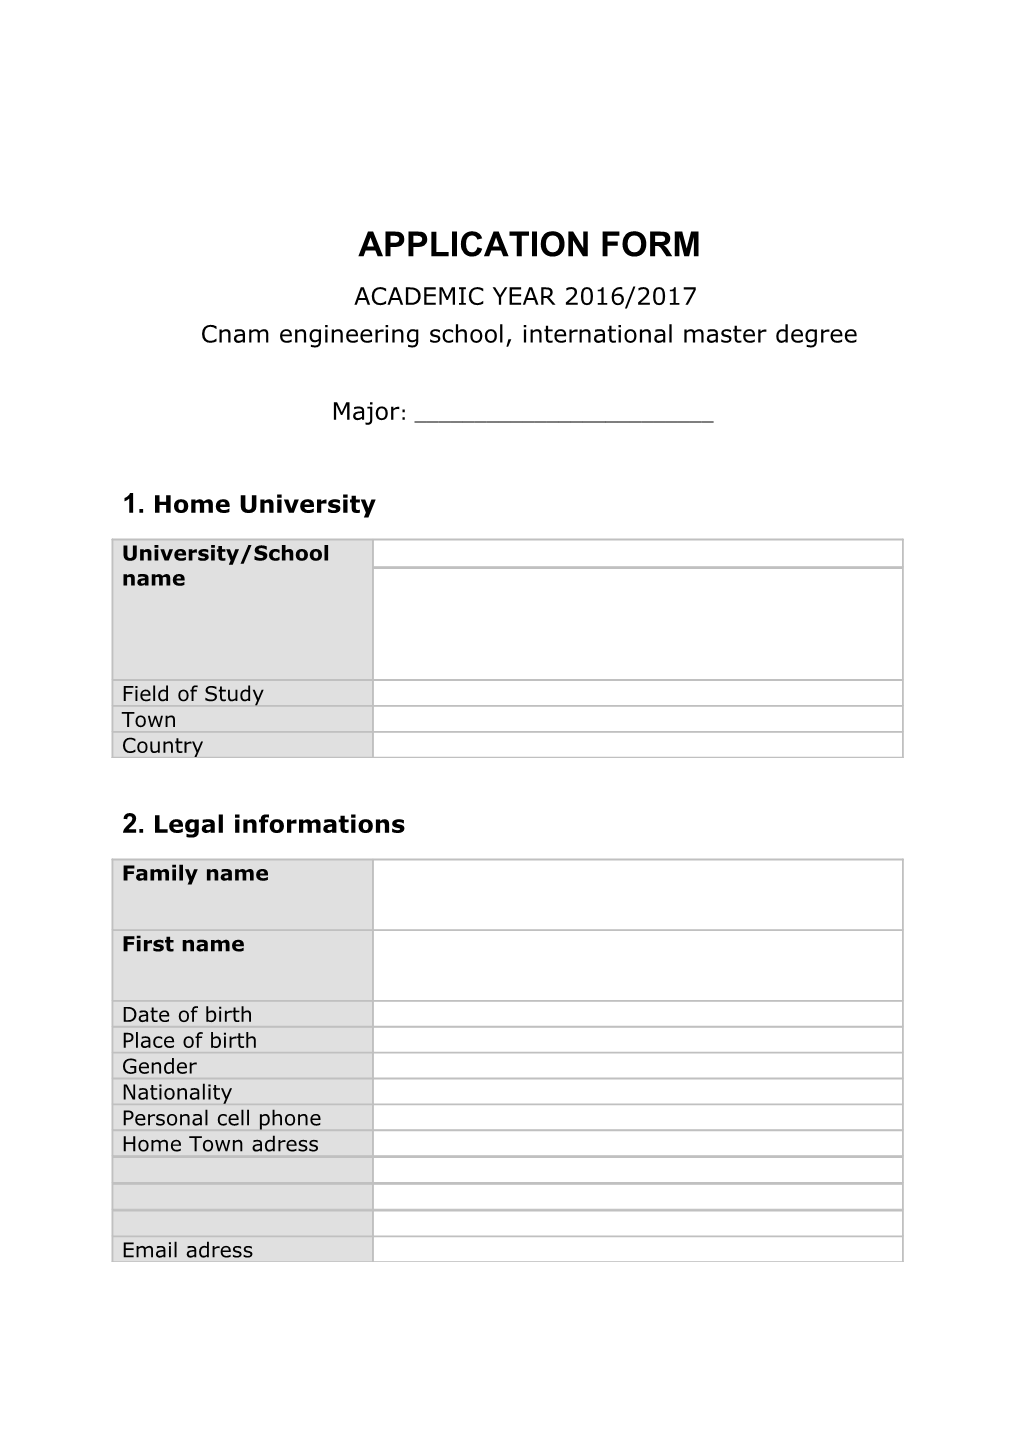 Application Form s49